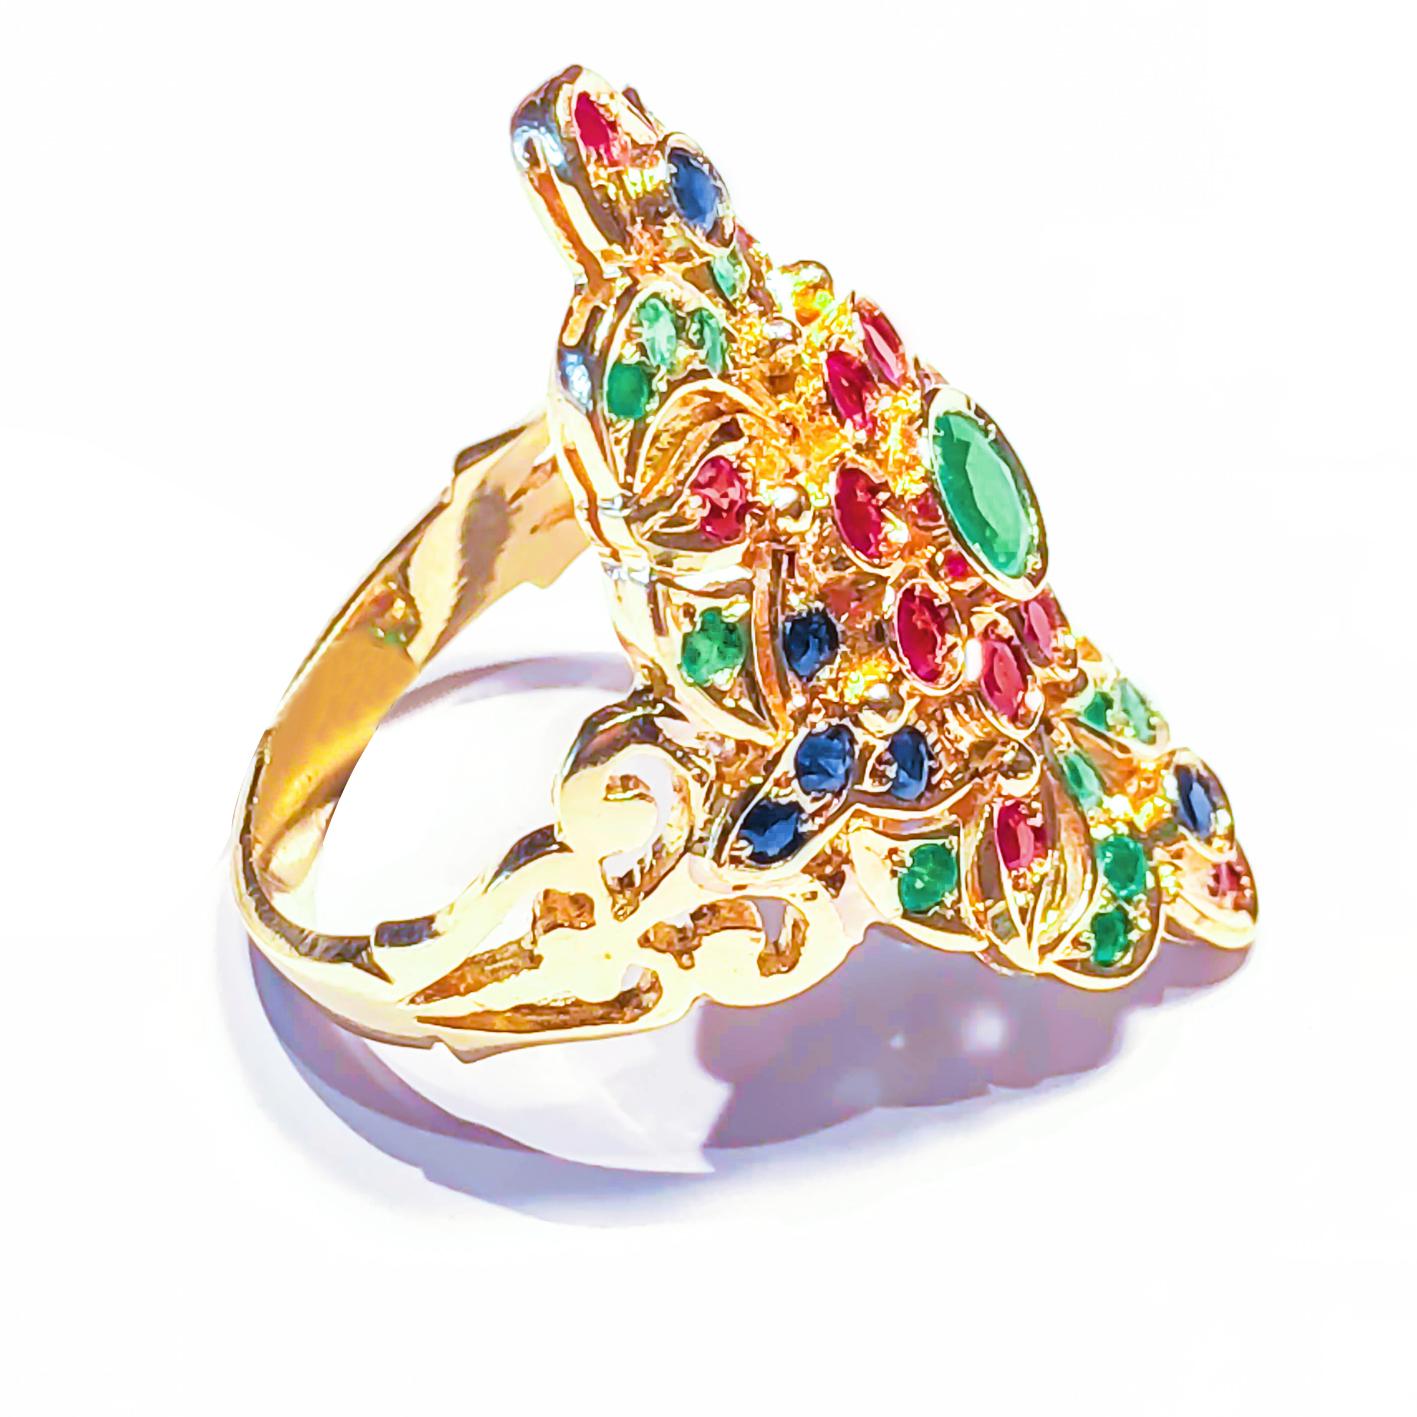 S.Georgios Hand Made 18 Karat Yellow Gold Ring decorated with Byzantine-style granulation and a combination of Rubies, Emerald, and Sapphires.
It features Rubies, Sapphires, and an Emerald center all a total weight of 1,40 Carat.
It can also be